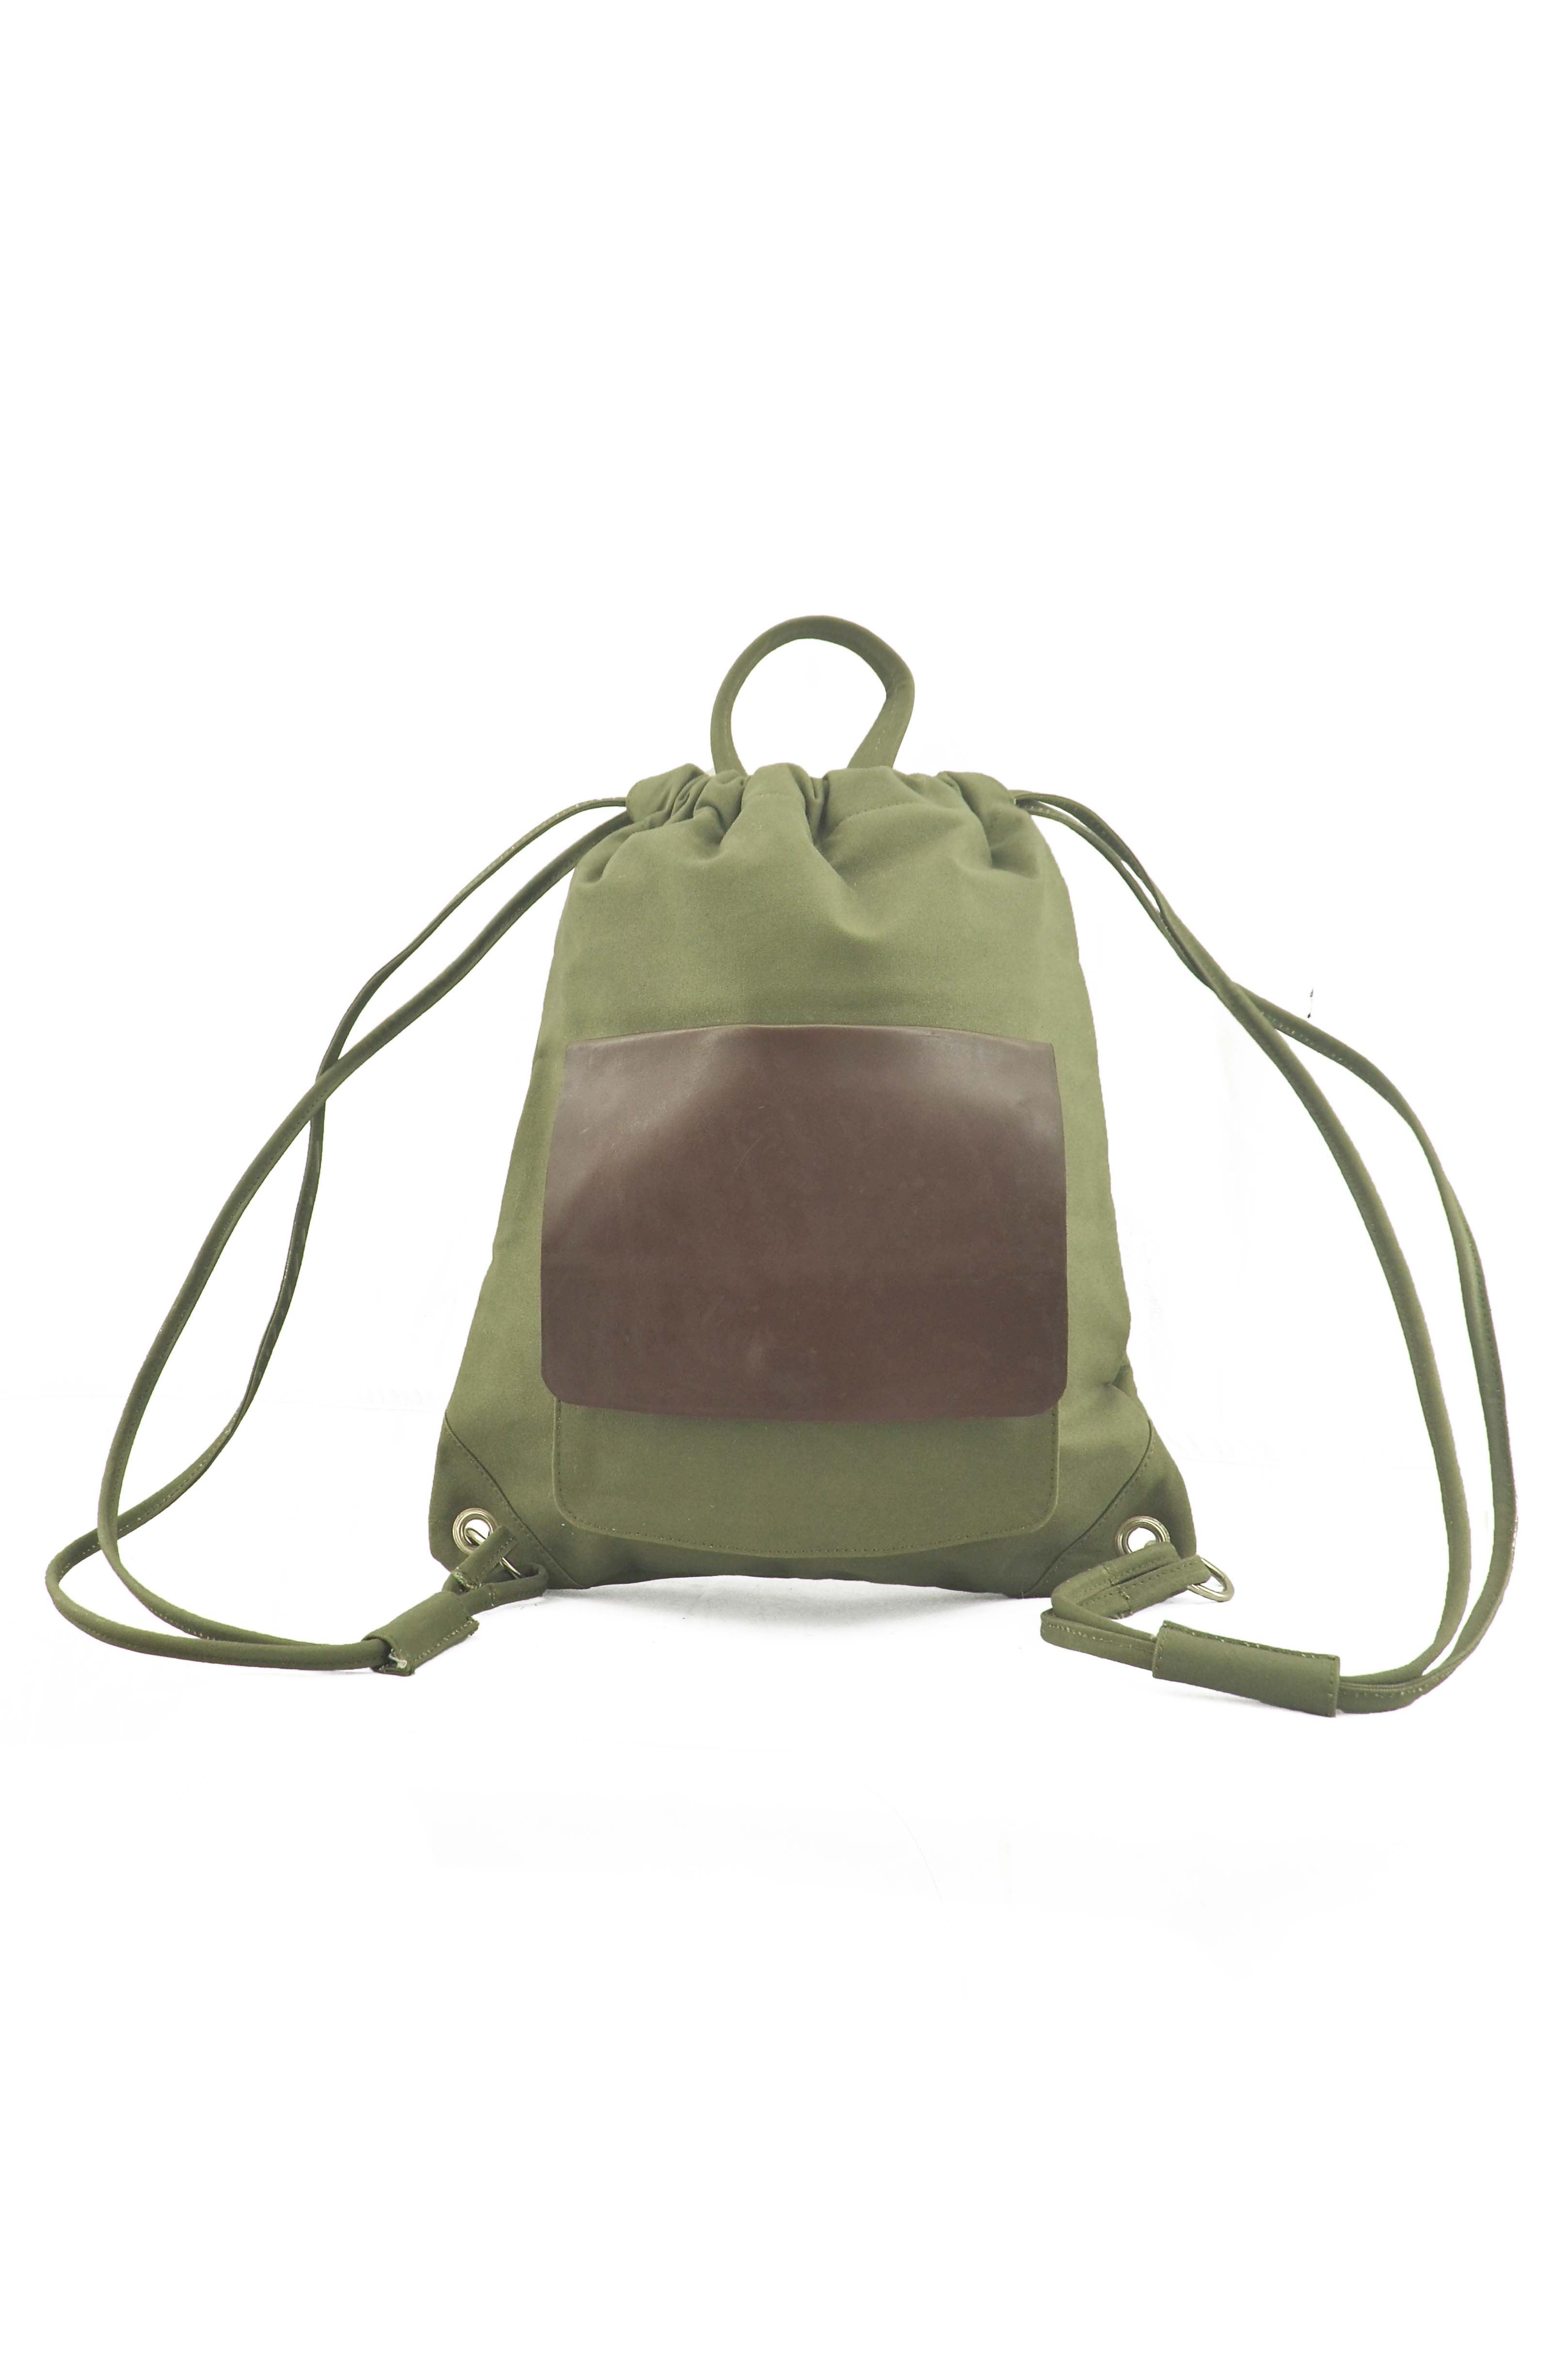 Drawstring Backpack : Green and Brown